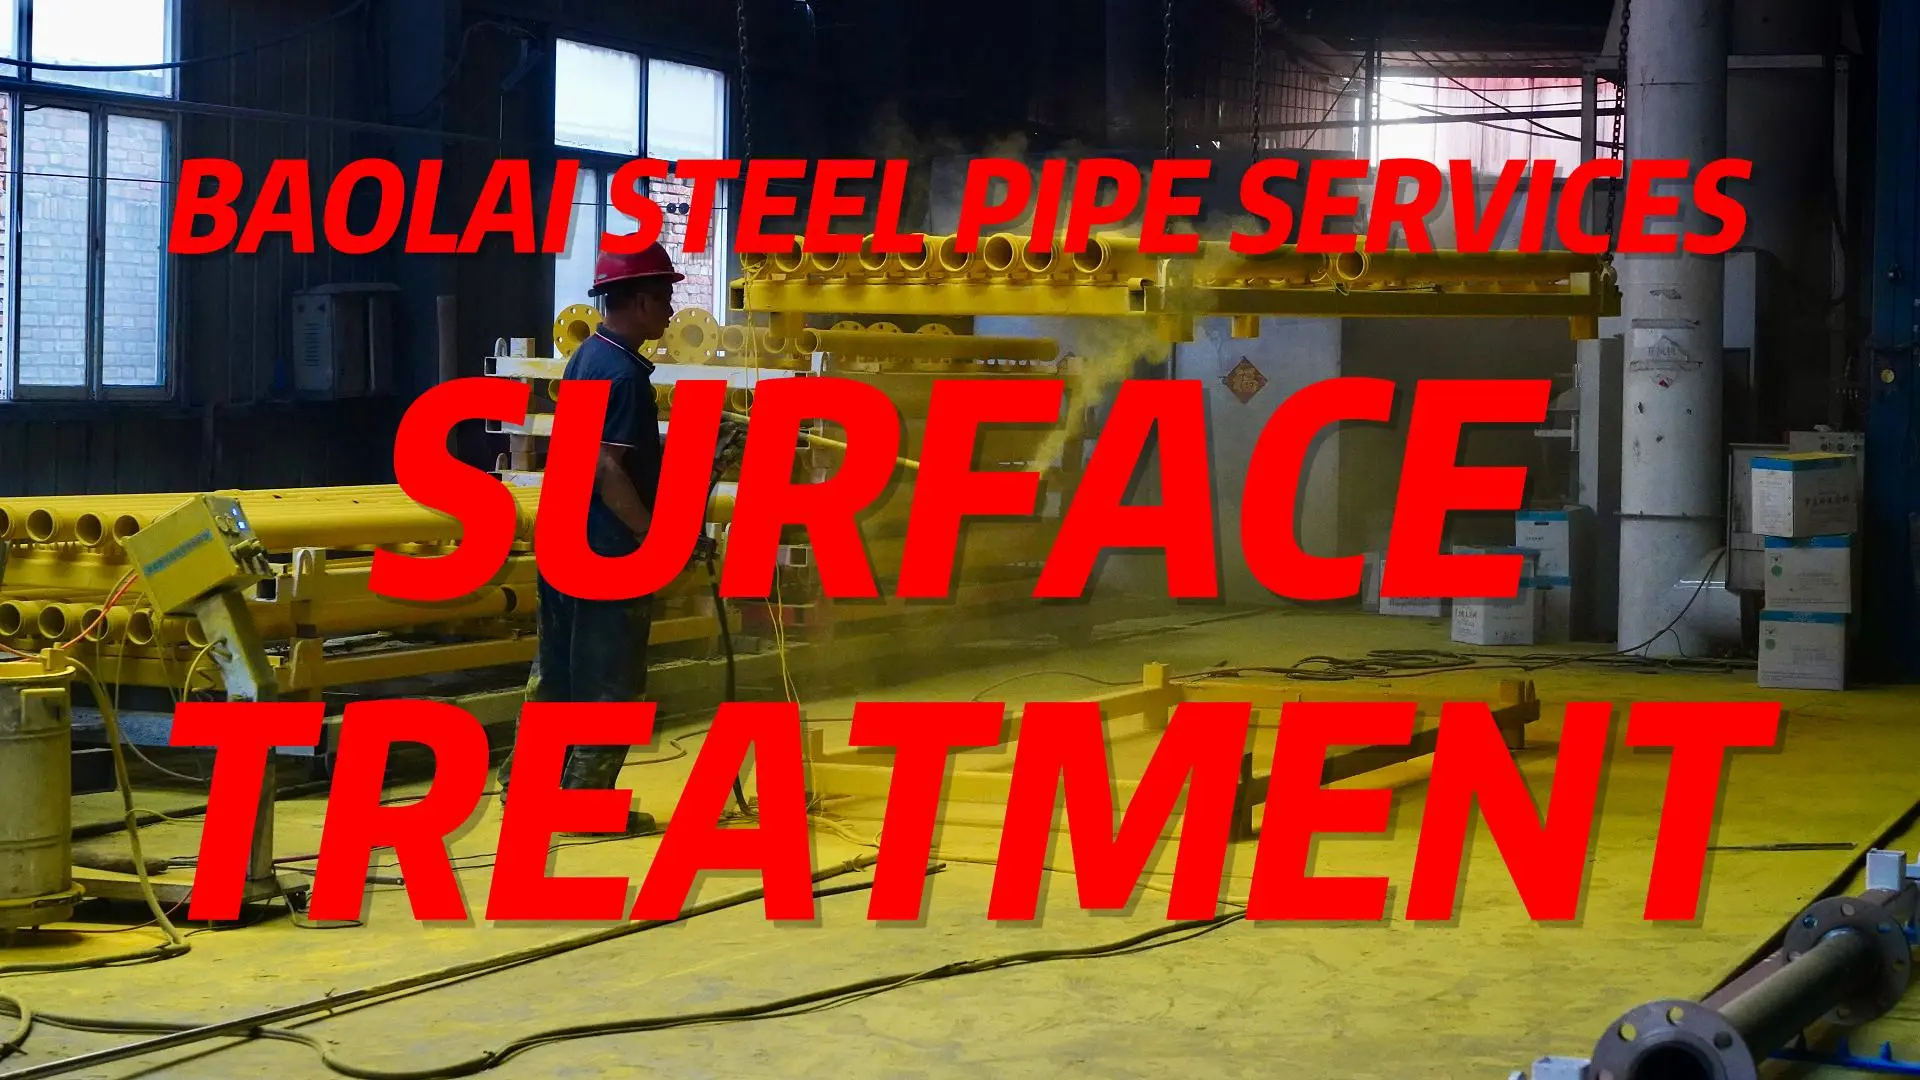 What surface treatment can you provide in Baolai Steel Pipe